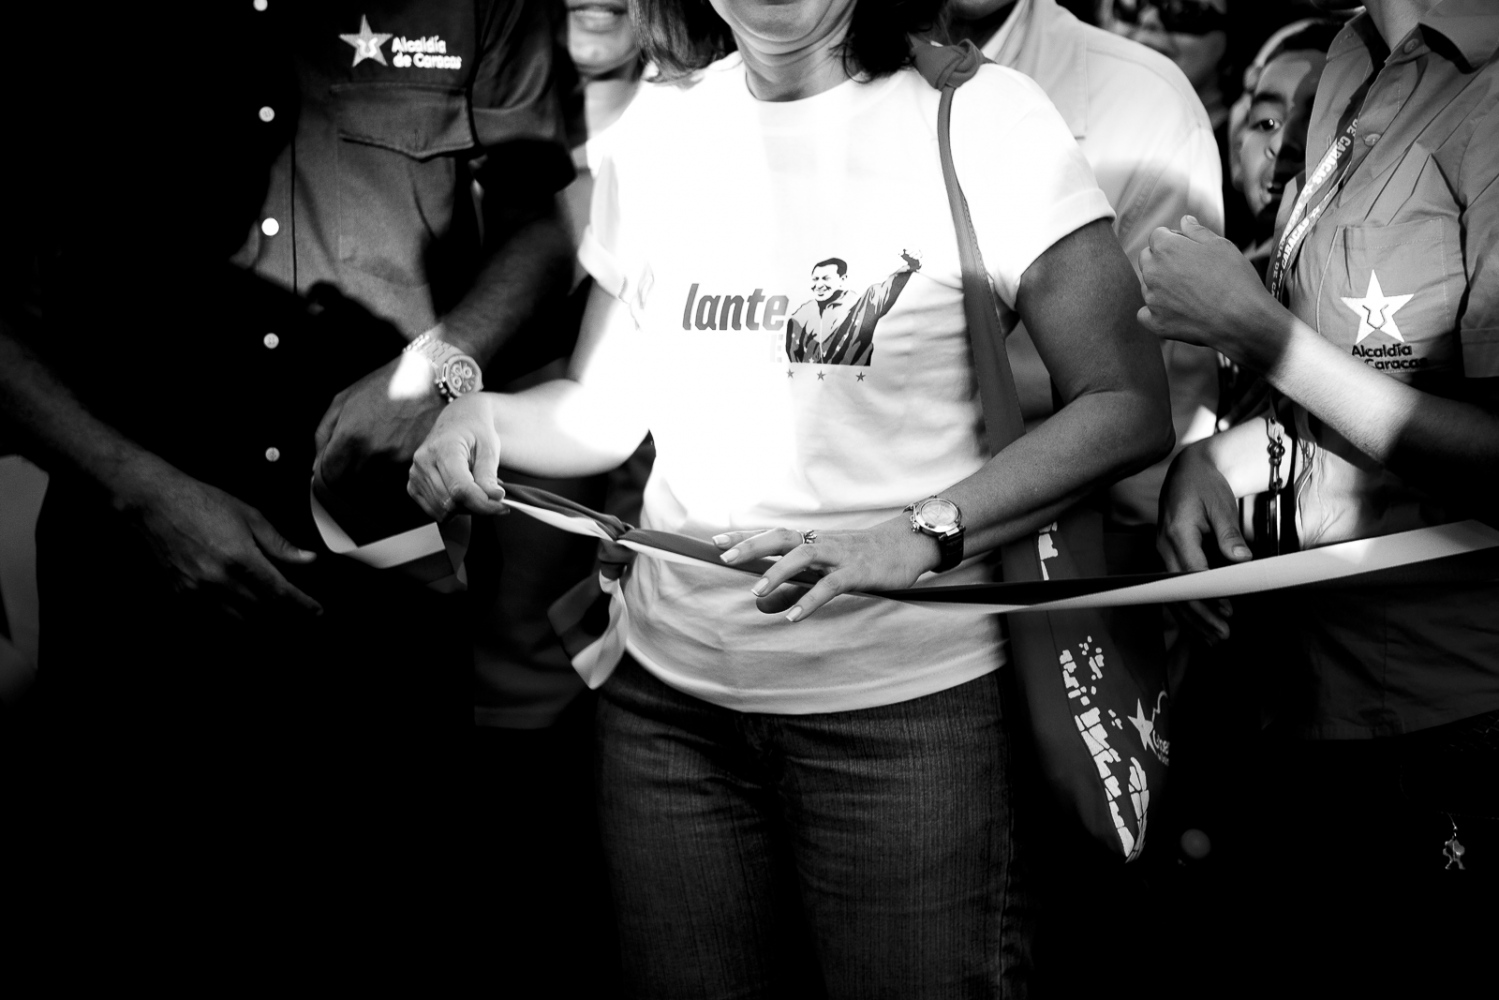  Jacqueline Faria, Chief of the Government of the Federal District, inaugurates a new boulevard in central Caracas, while President Hugo Ch&aacute;vez was missing due to illness, 2 nd July 2011. Days before Ch&aacute;vez announced on national television that he had cancer. 